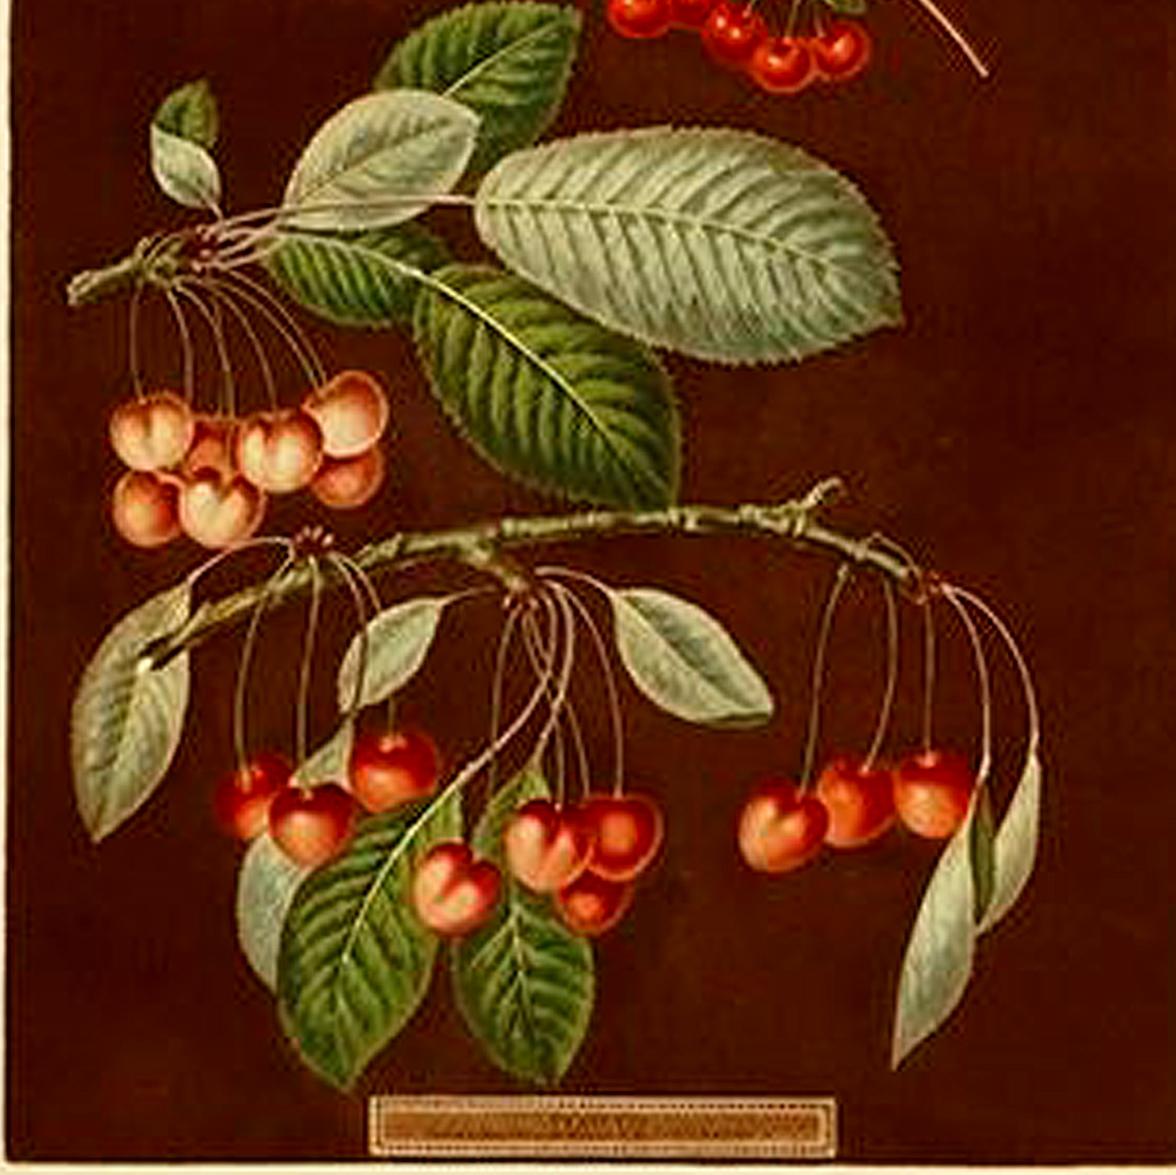 George Brookshaw Engravings of Cherries,
From Pomona Britannica, 
Plate VIII, Dated 1807,

The applied Publication Legion below and center-reads Plate VIII, Painted & Published as the Act Directs by the Author G. Brookshaw 1807.

This aquatint